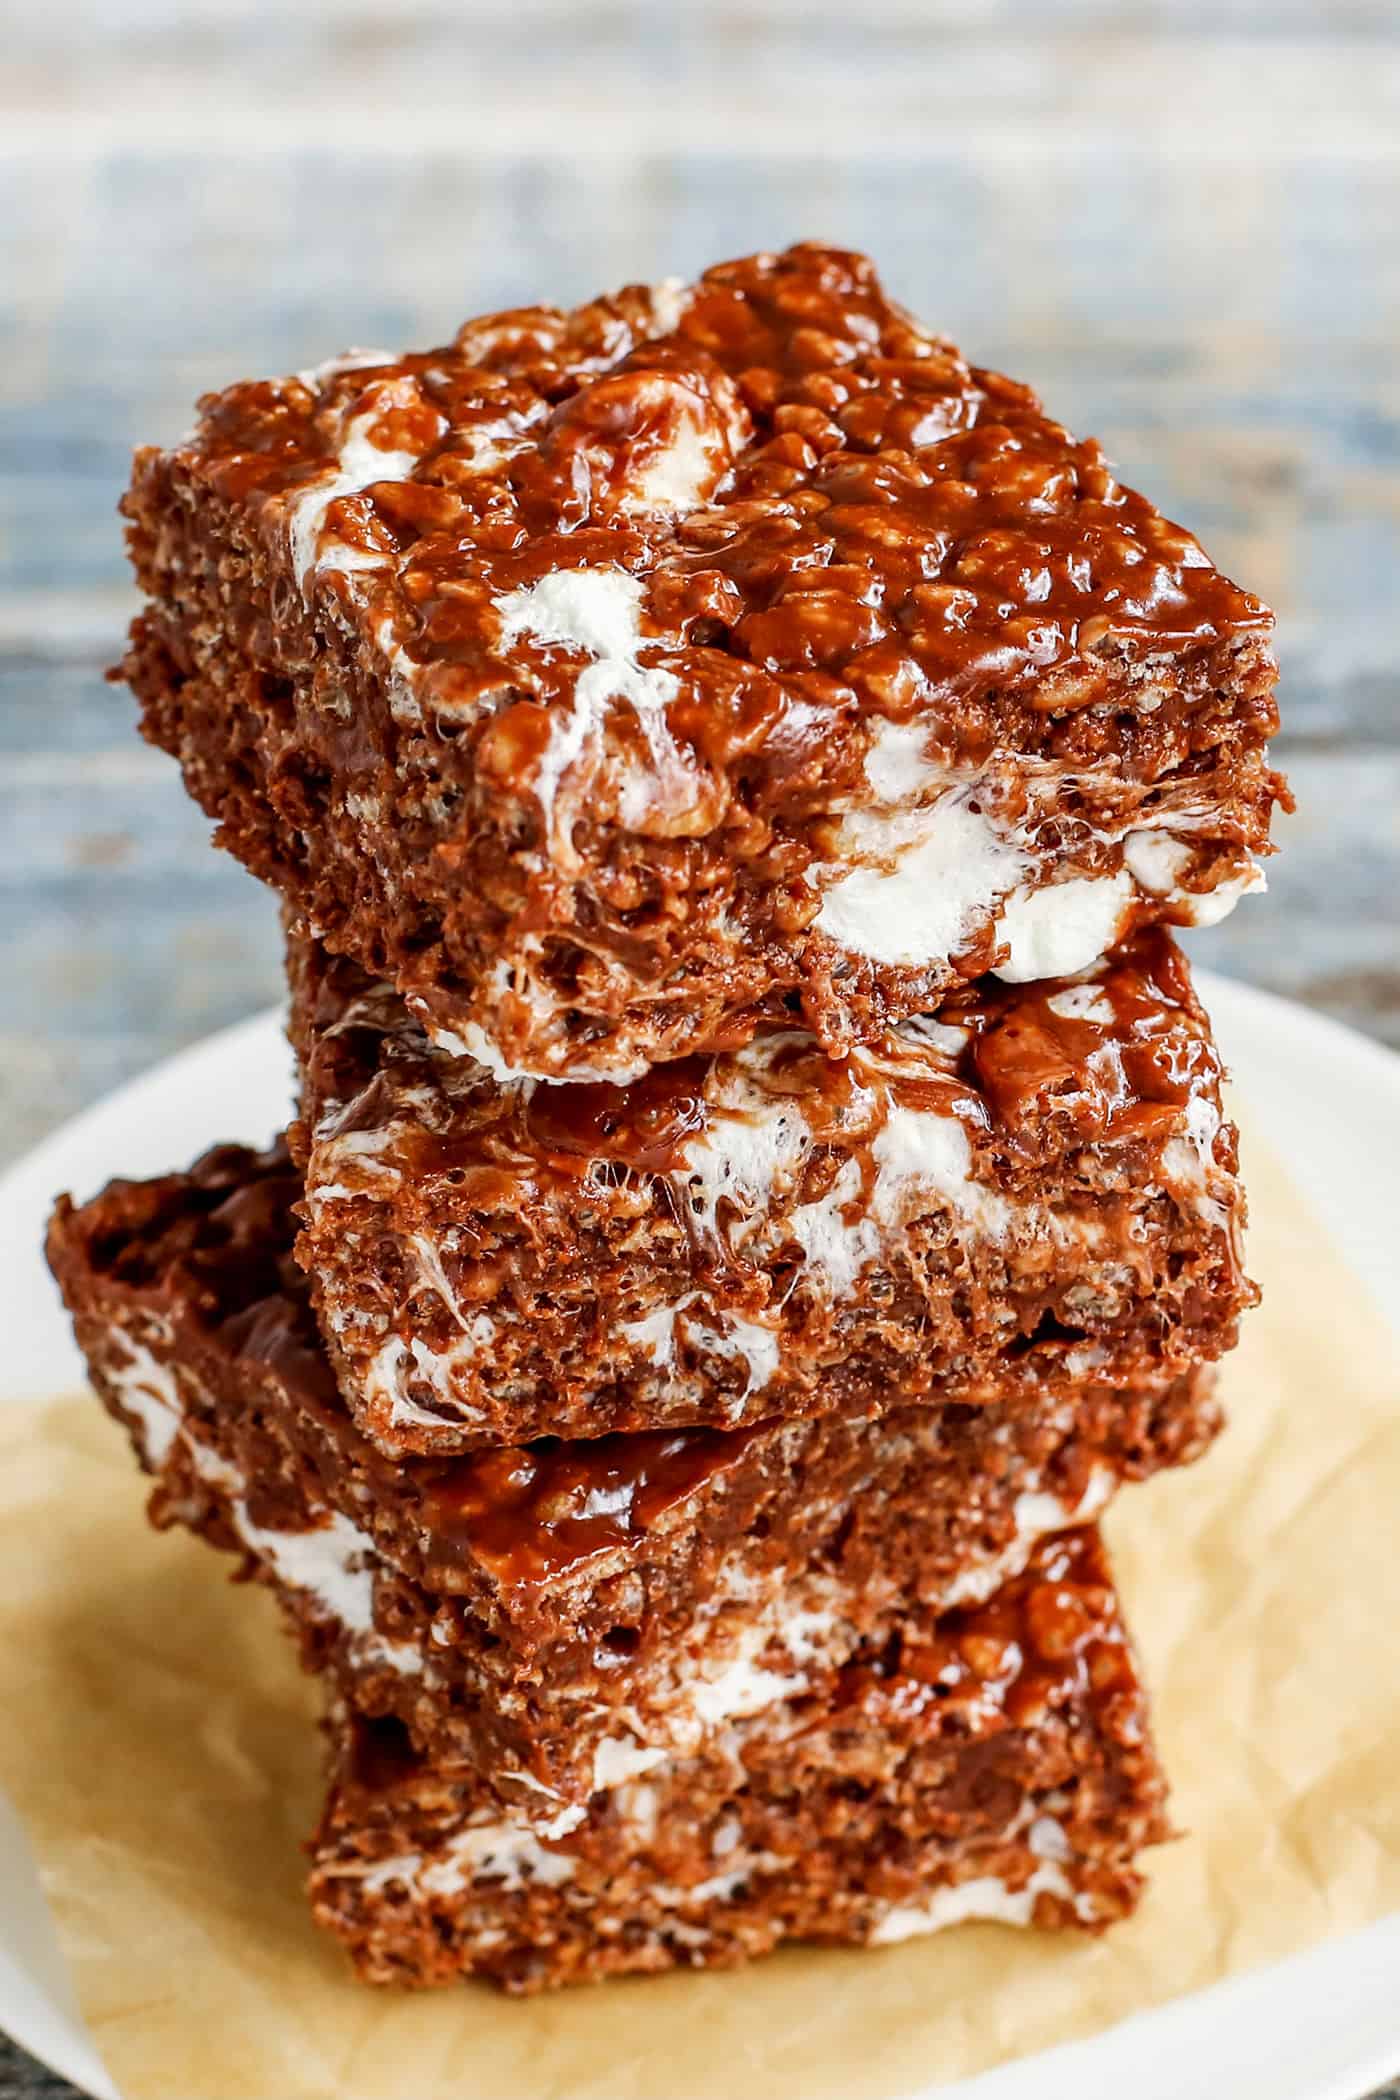 A close-up of 3 chocolate peanut butter rice krispies bars stacked on a plate